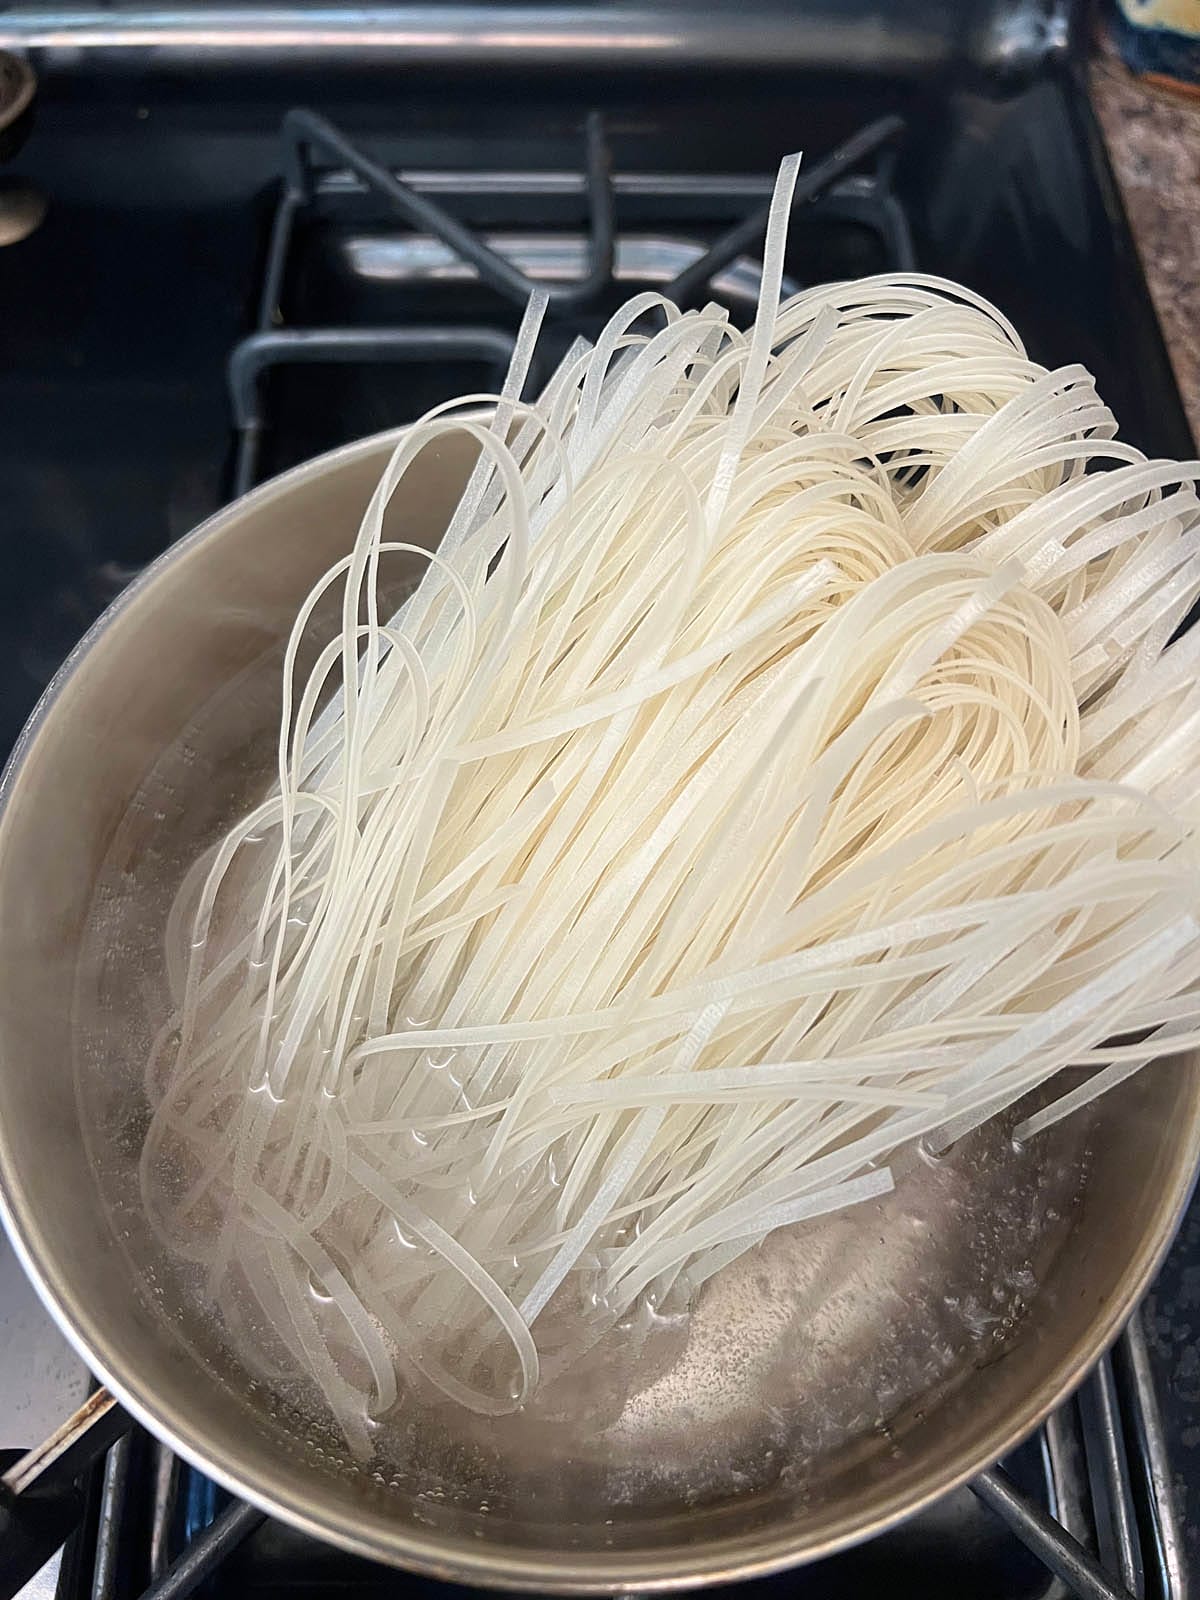 Rice noodles being added to a saucepan with boiling water.